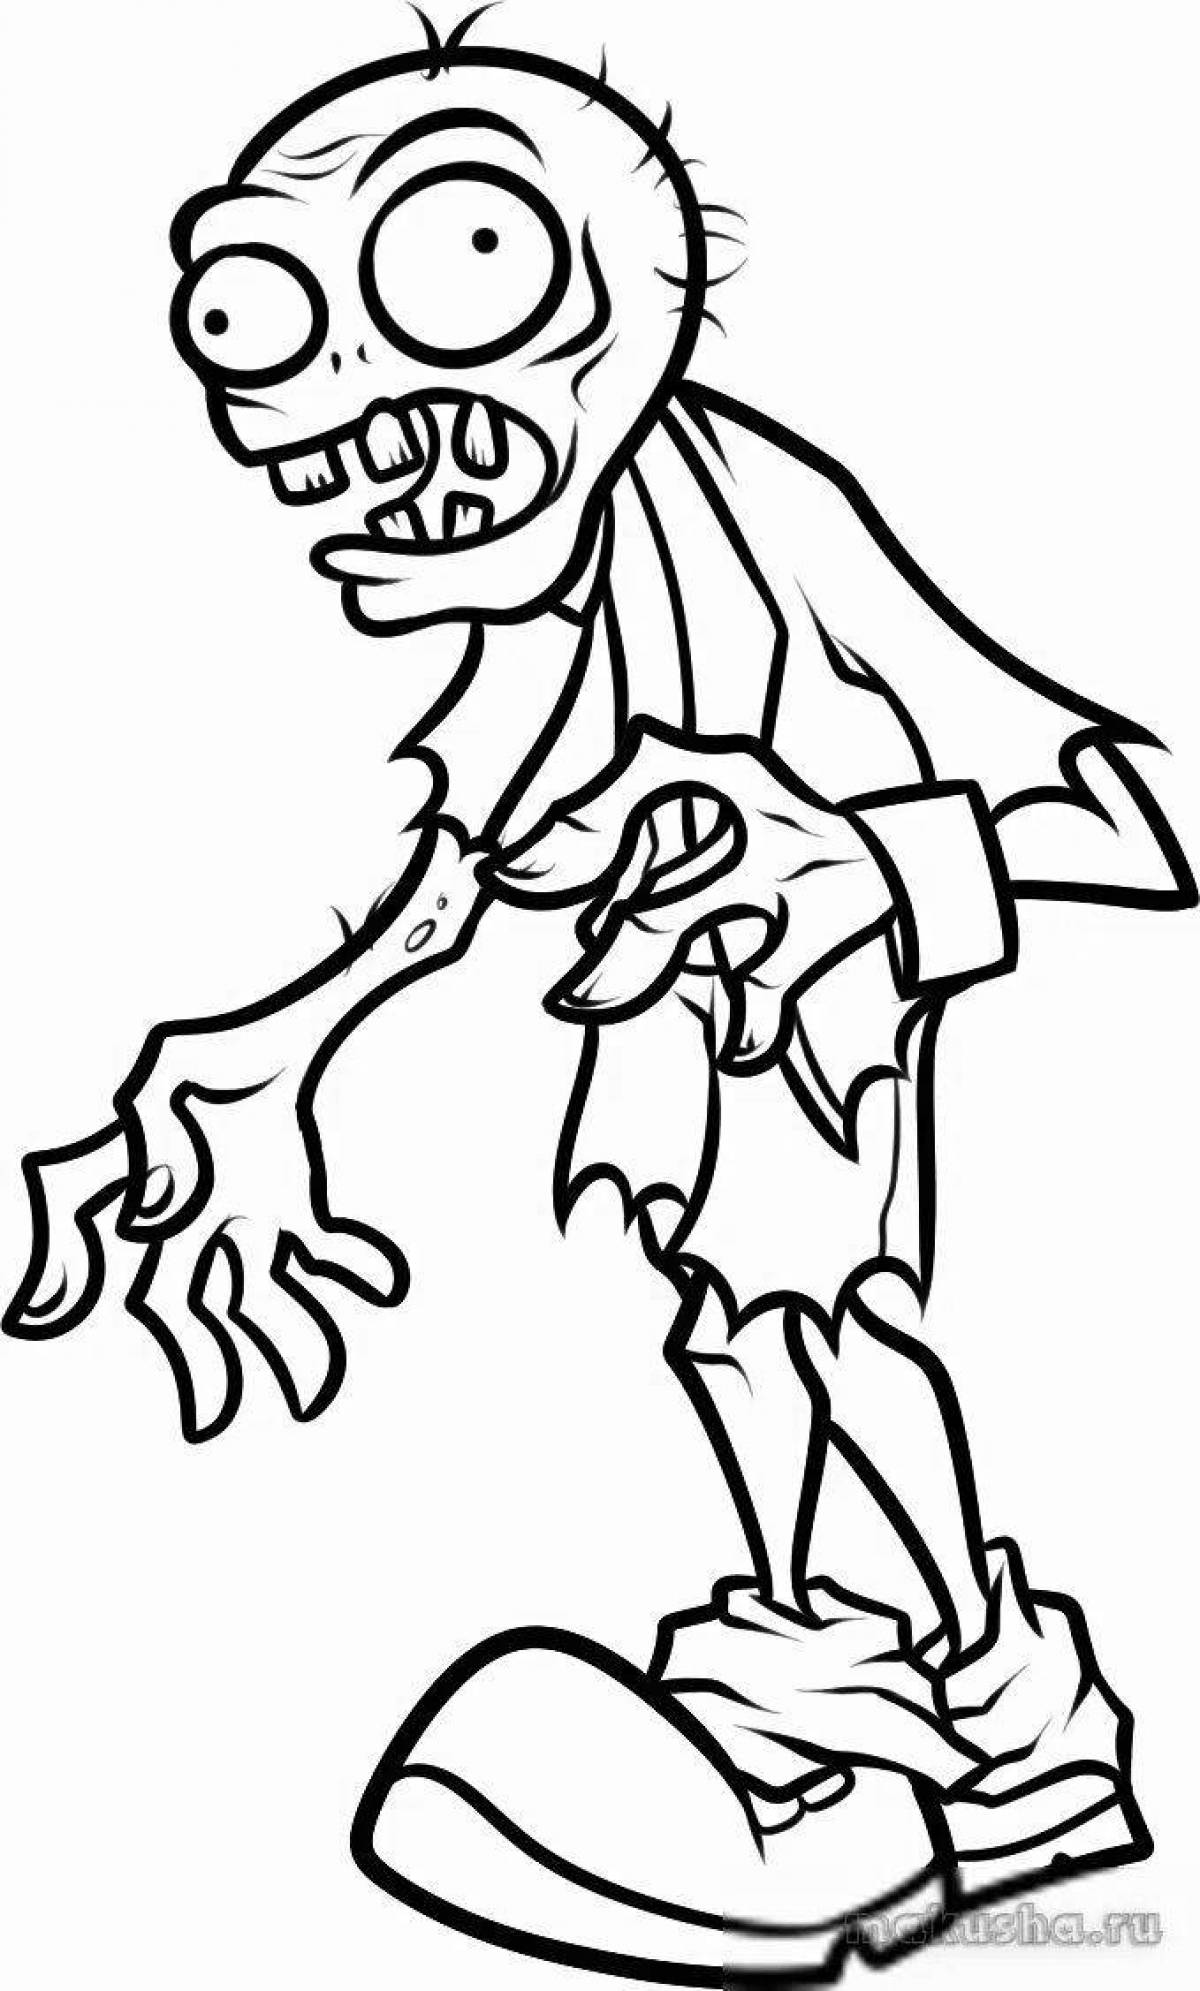 Zombie repulsive ace coloring page